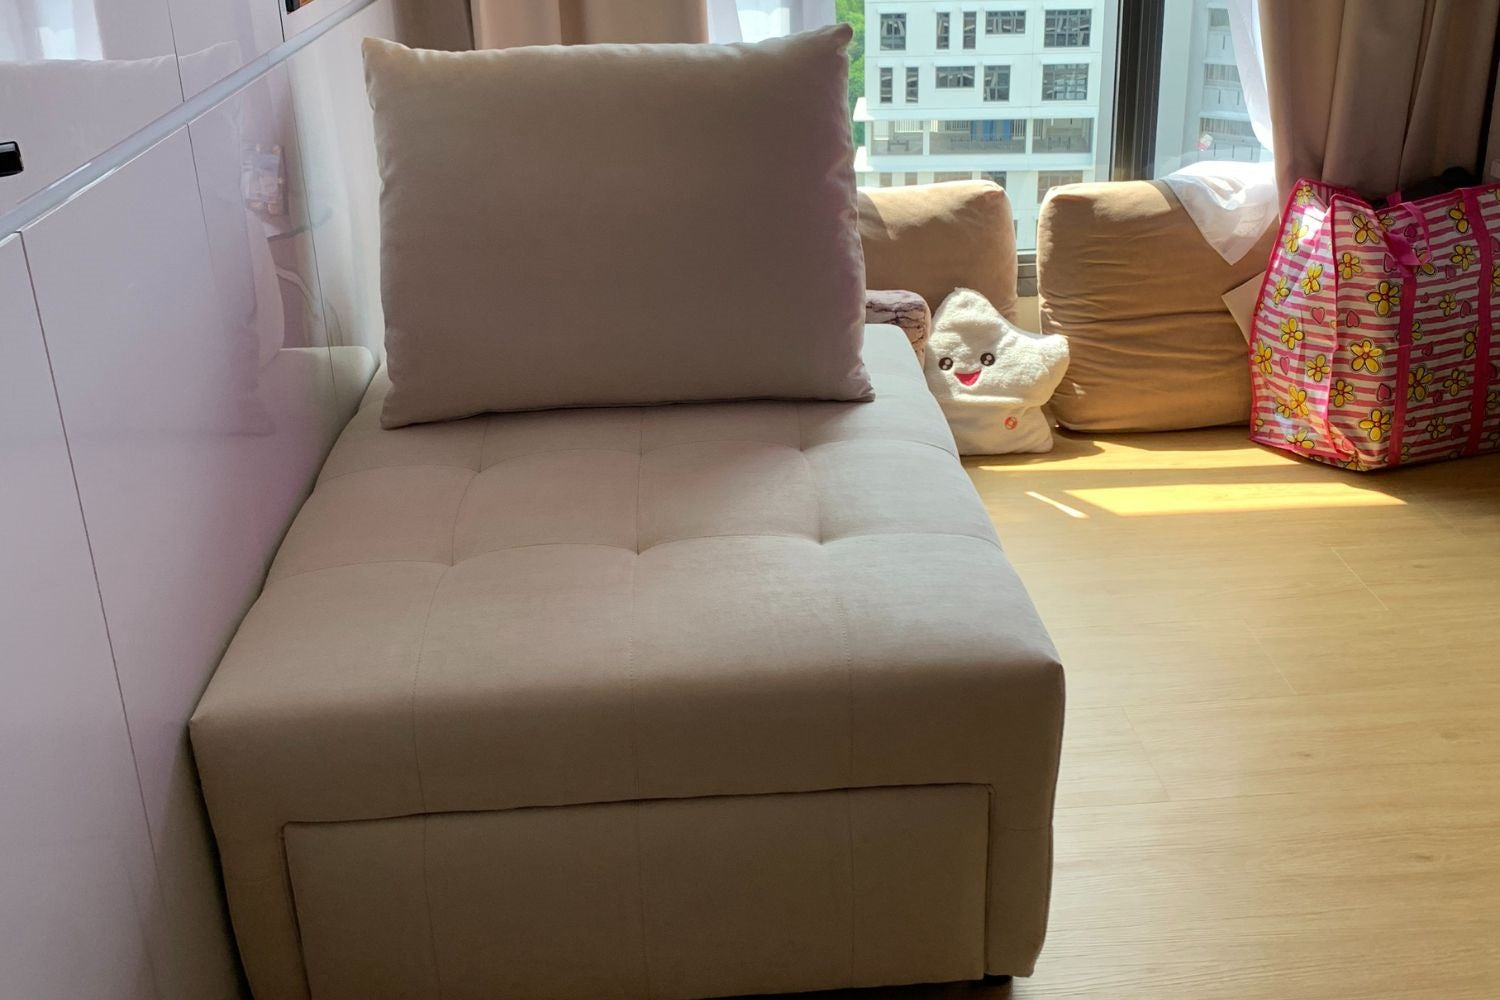 Candy 85cm beige fabric sofa bed in real customer's home